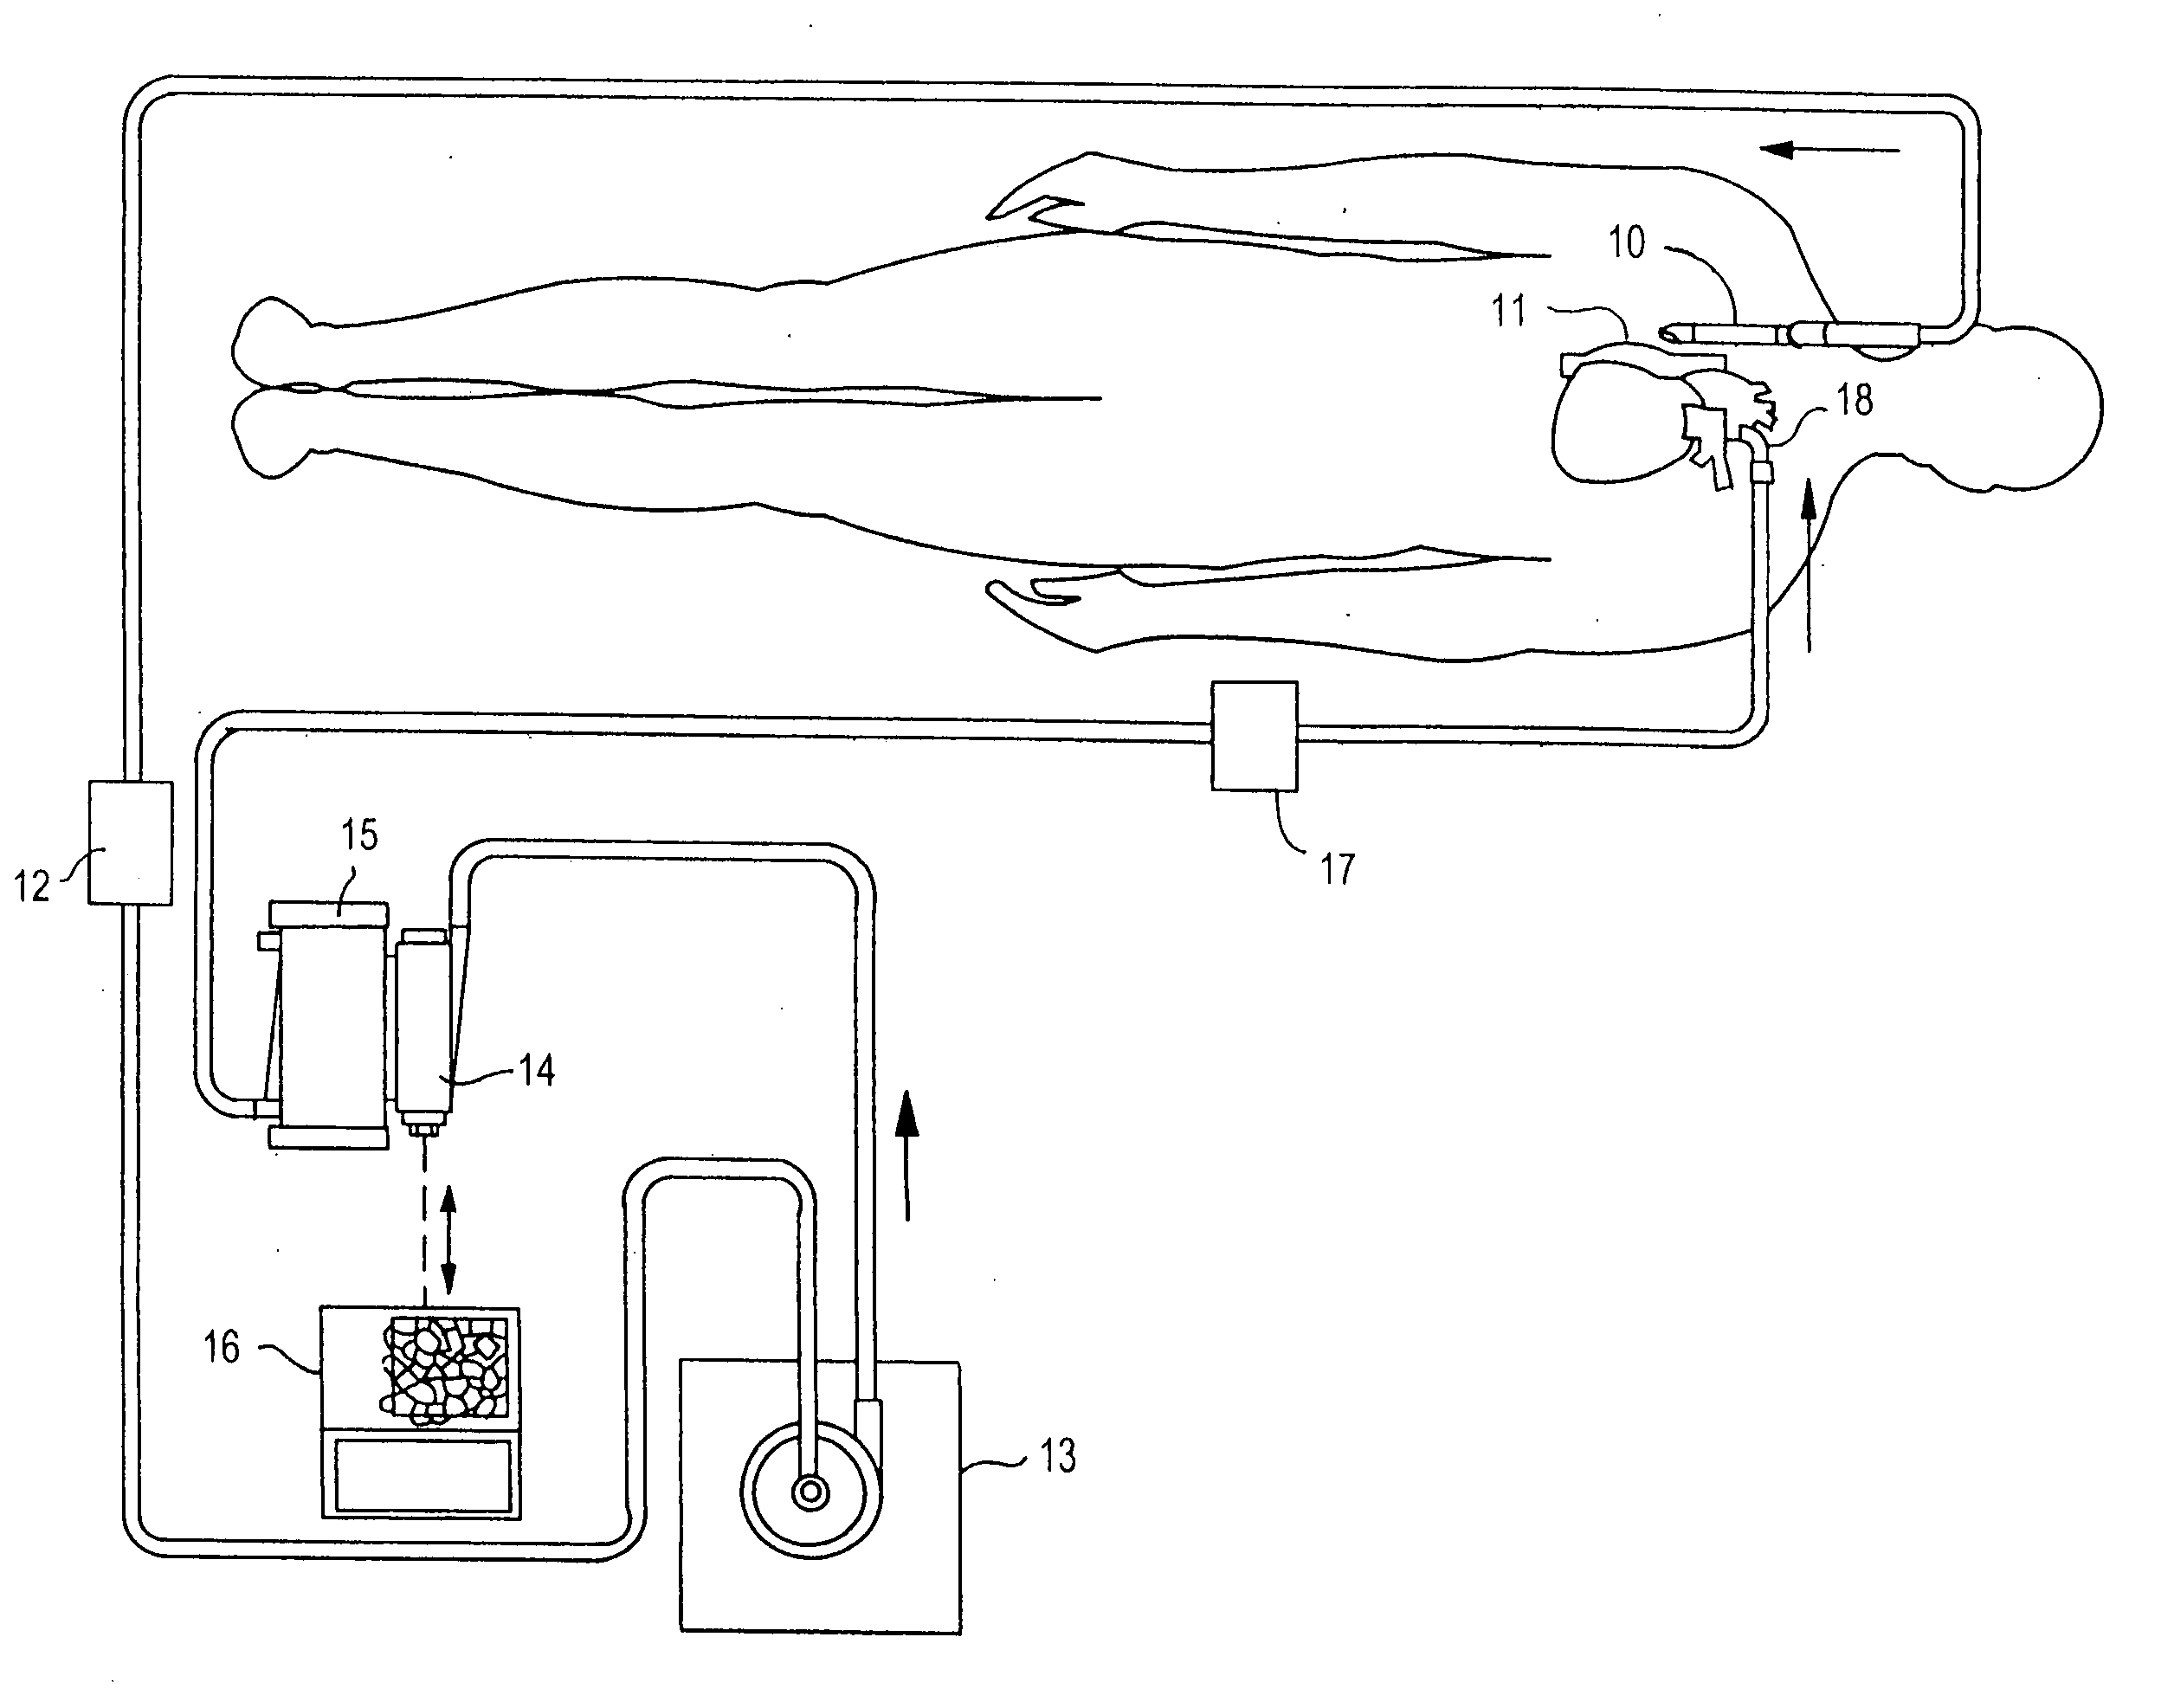 Float-driven lever arm for blood perfusion air removal device